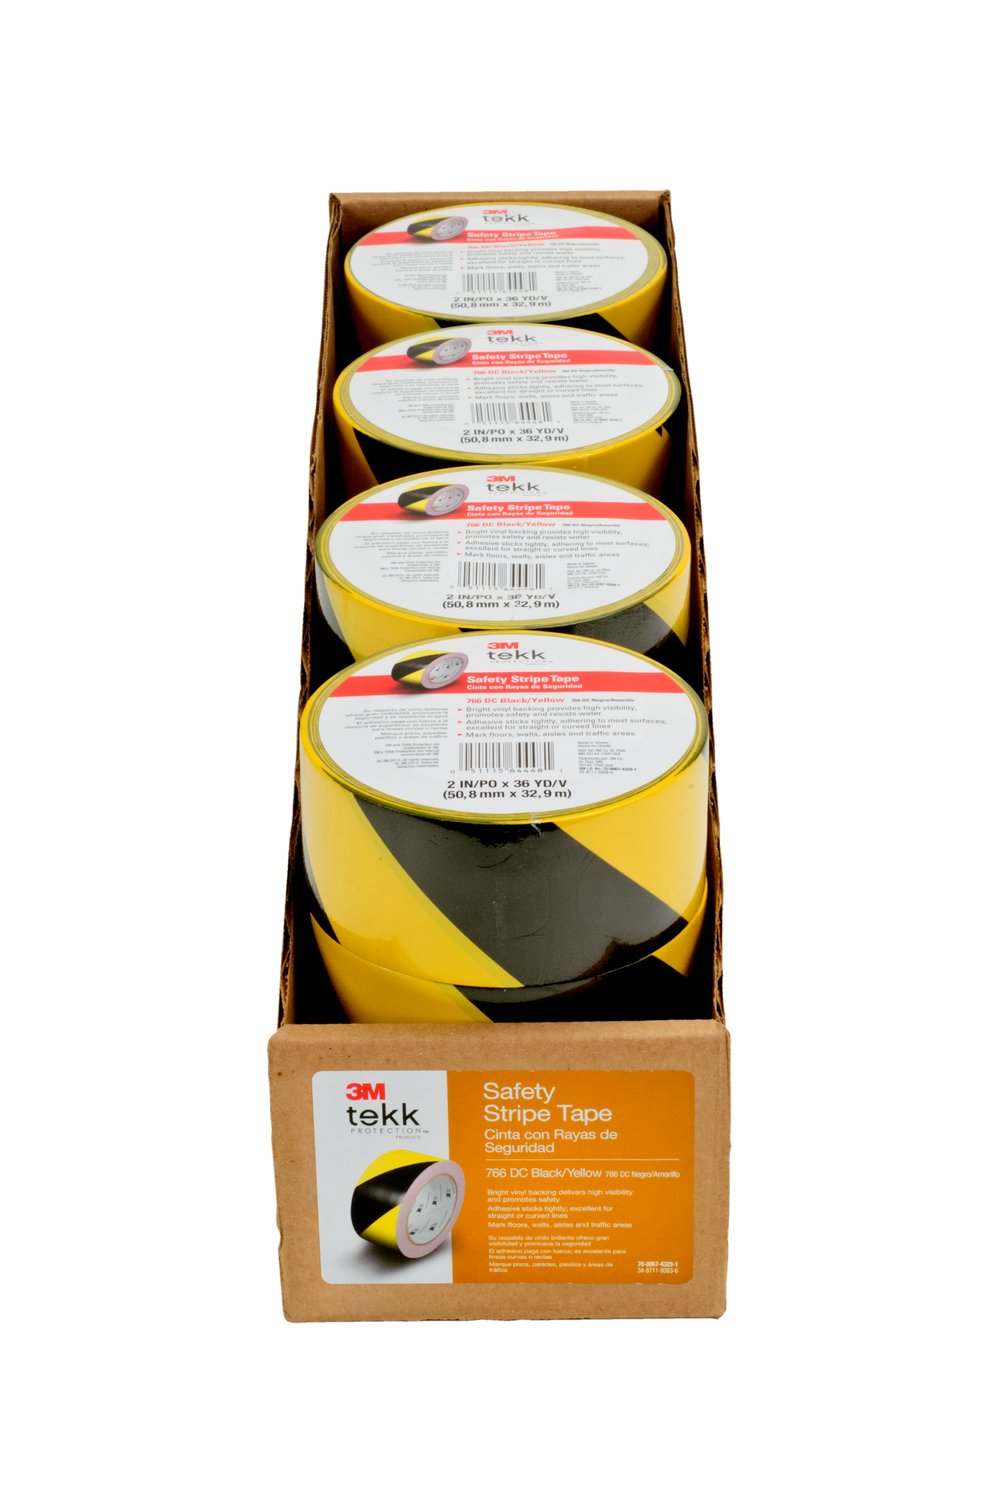 7100170131 - 3M Safety Stripe Vinyl Tape 766DC, Black/Yellow, 2 in x 36 yd, 5 mil, 12 Roll/Case, Individually Wrapped Conveniently Packaged